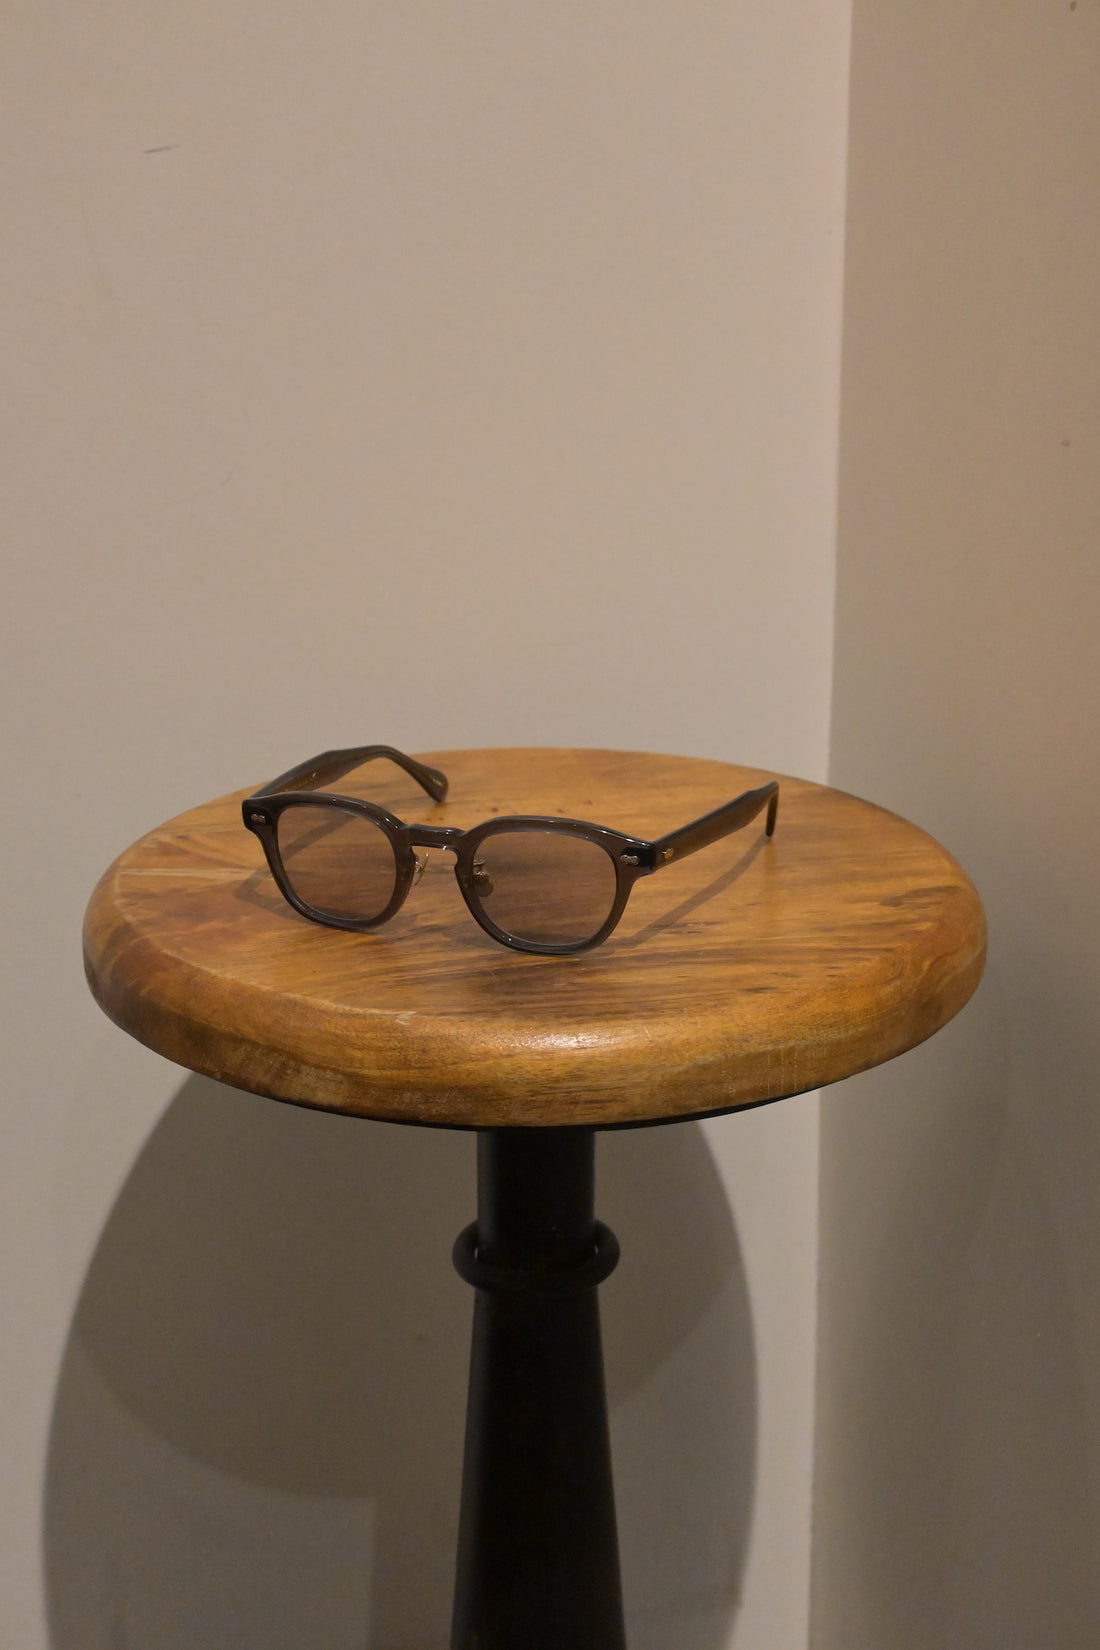 【 MOSCOT 】New Arrival